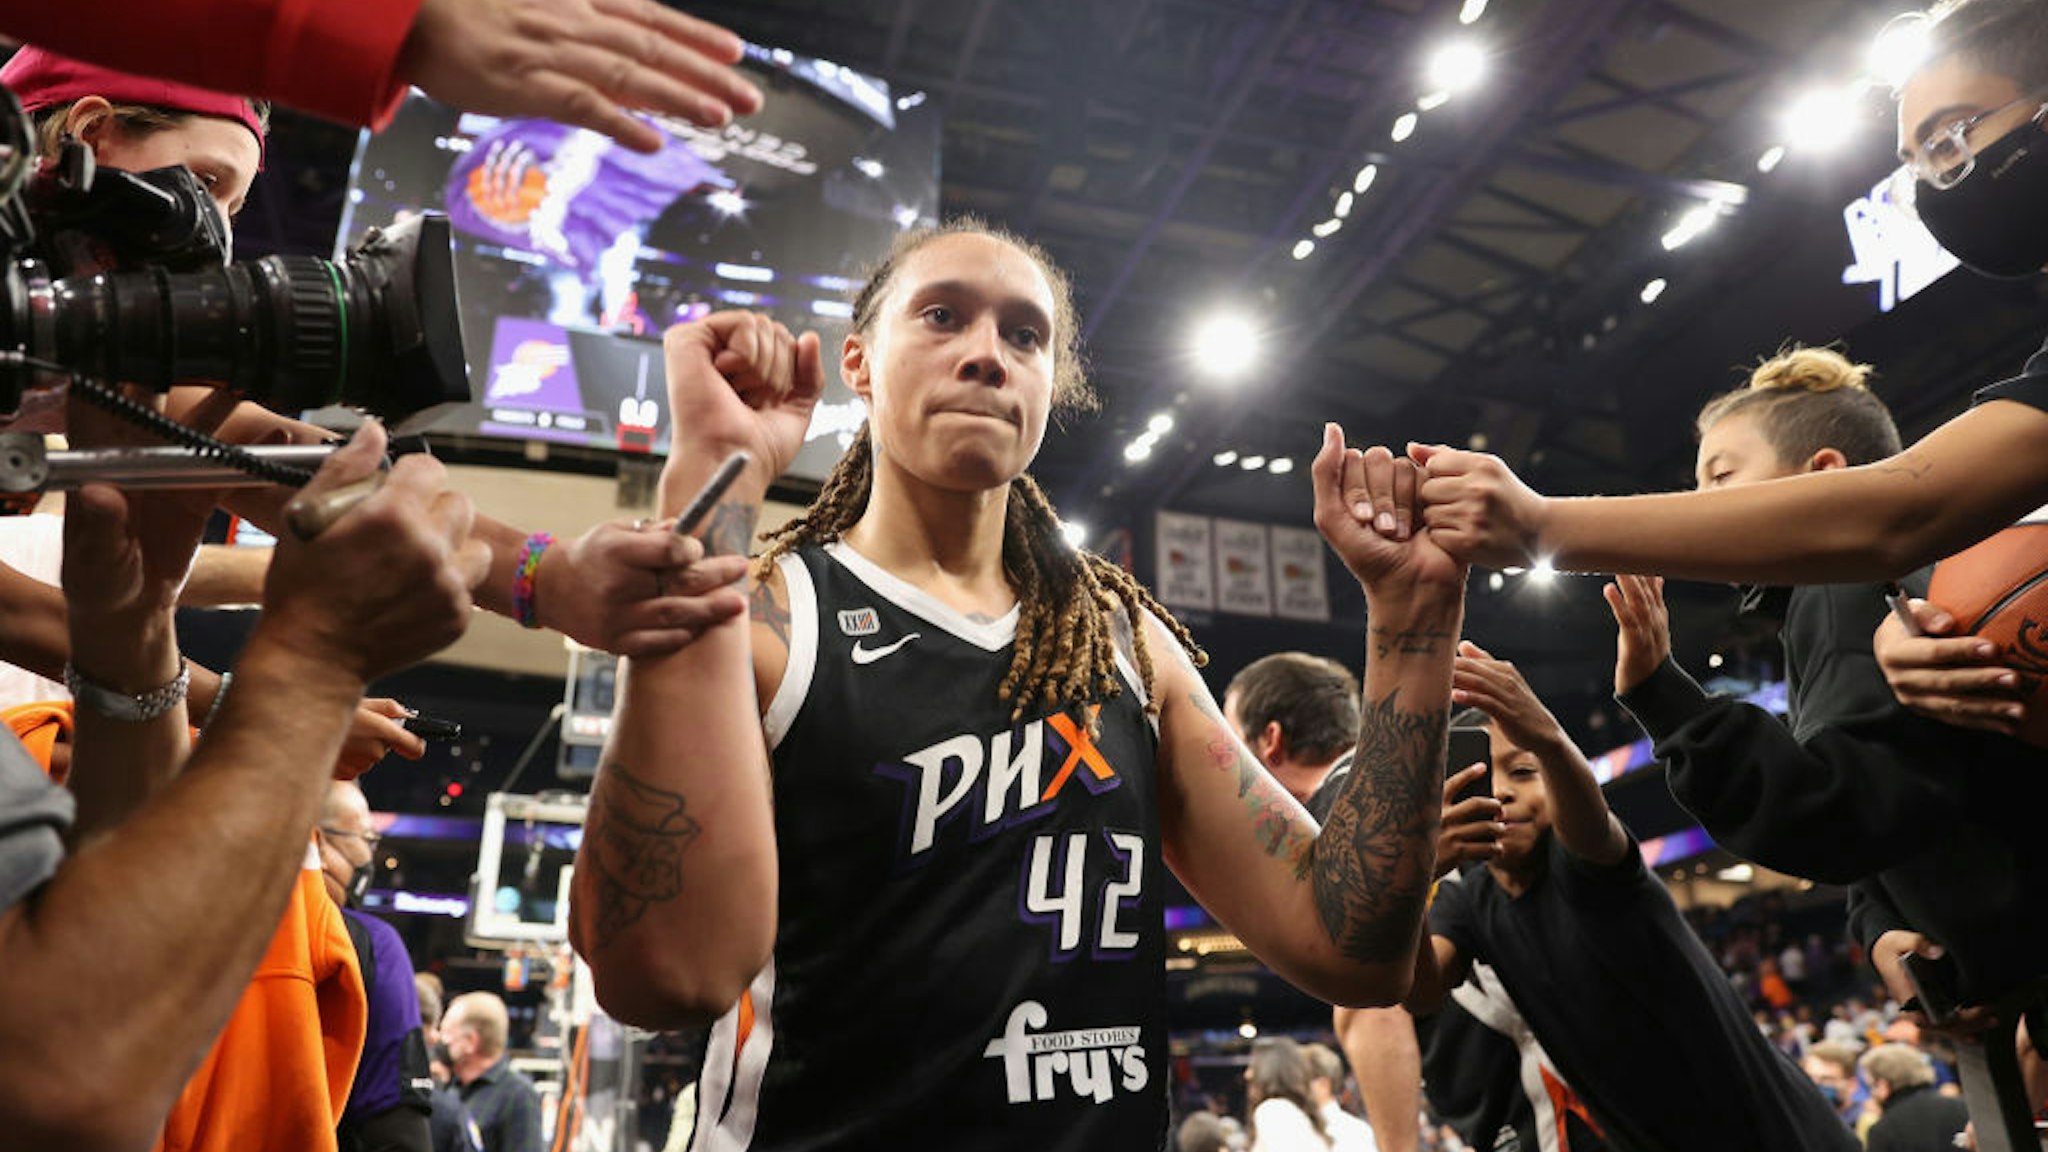 PHOENIX, ARIZONA - OCTOBER 13: Brittney Griner #42 of the Phoenix Mercury celebrates with fans following Game Two of the 2021 WNBA Finals at Footprint Center on October 13, 2021 in Phoenix, Arizona. The Mercury defeated the Sky 91-86 in overtime. NOTE TO USER: User expressly acknowledges and agrees that, by downloading and or using this photograph, User is consenting to the terms and conditions of the Getty Images License Agreement. (Photo by Christian Petersen/Getty Images)